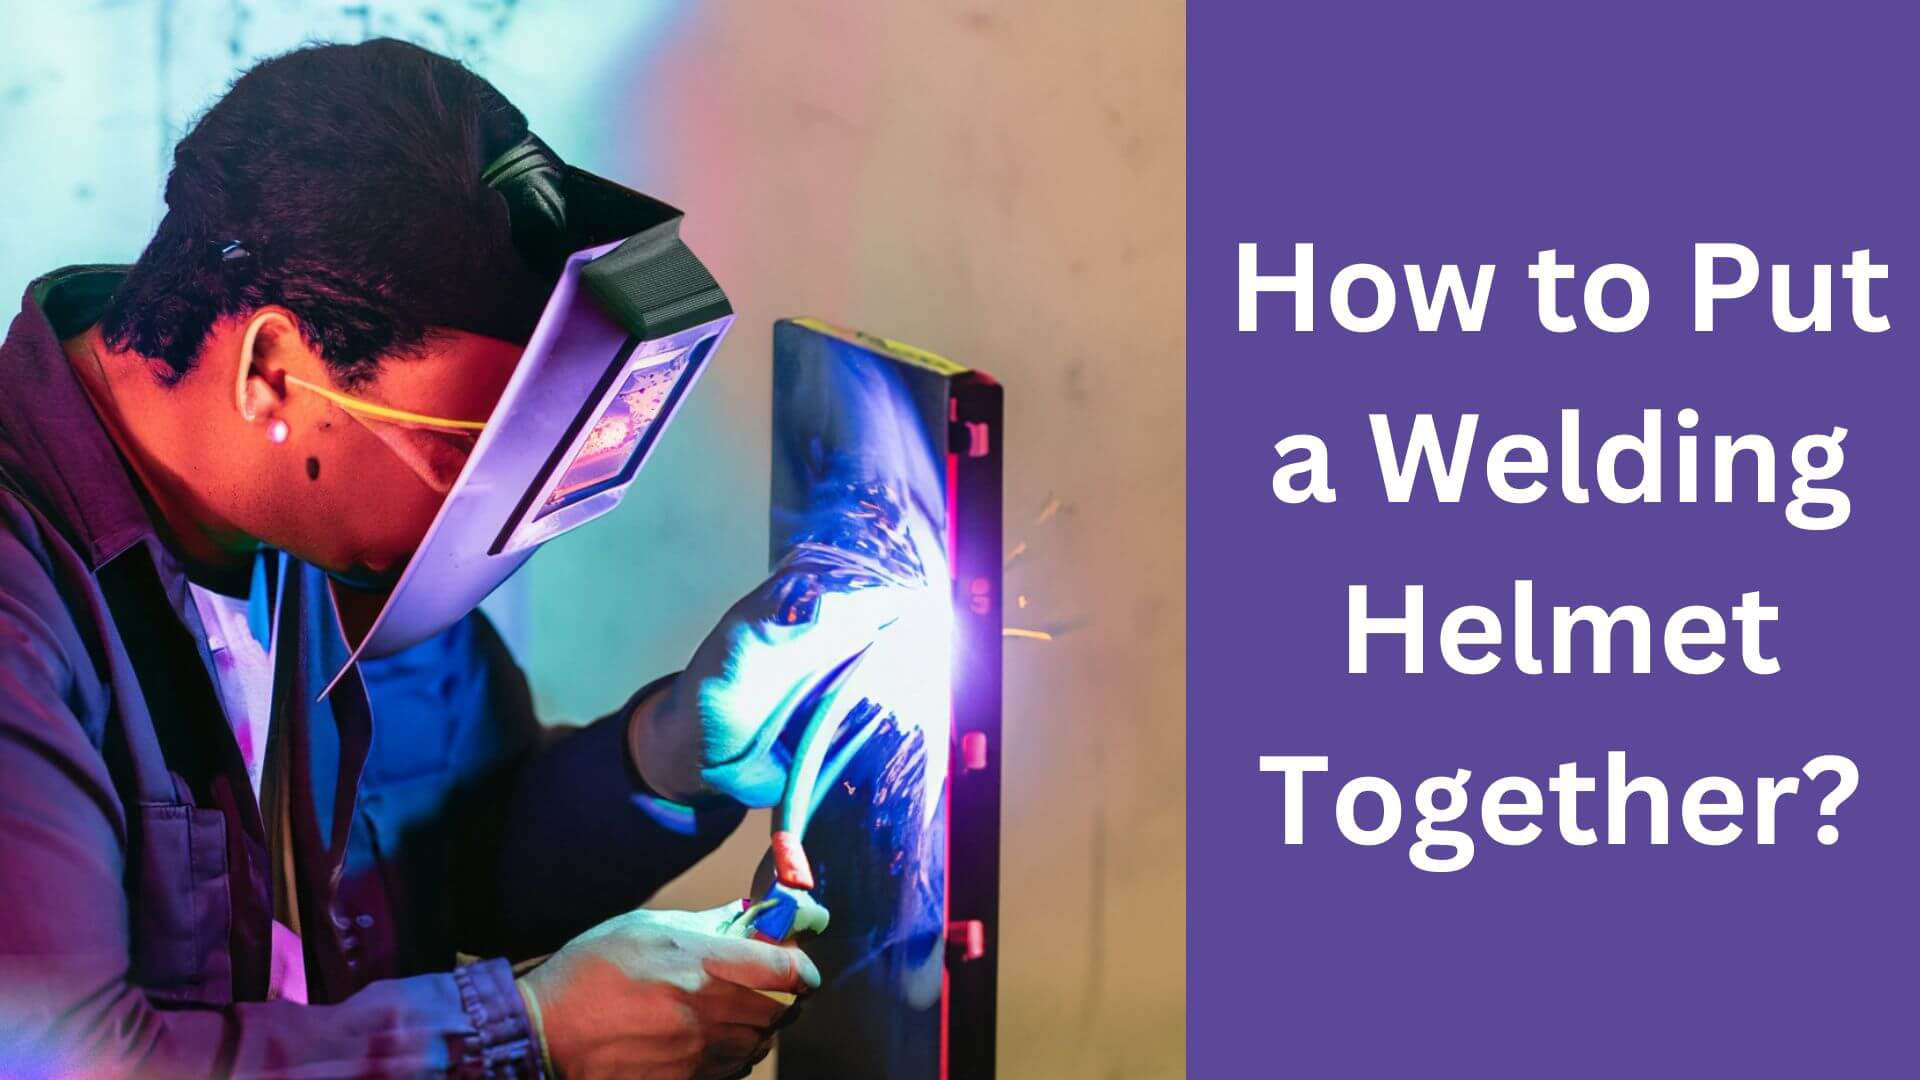 How to Put a Welding Helmet Together? A Step-by-Step Guide